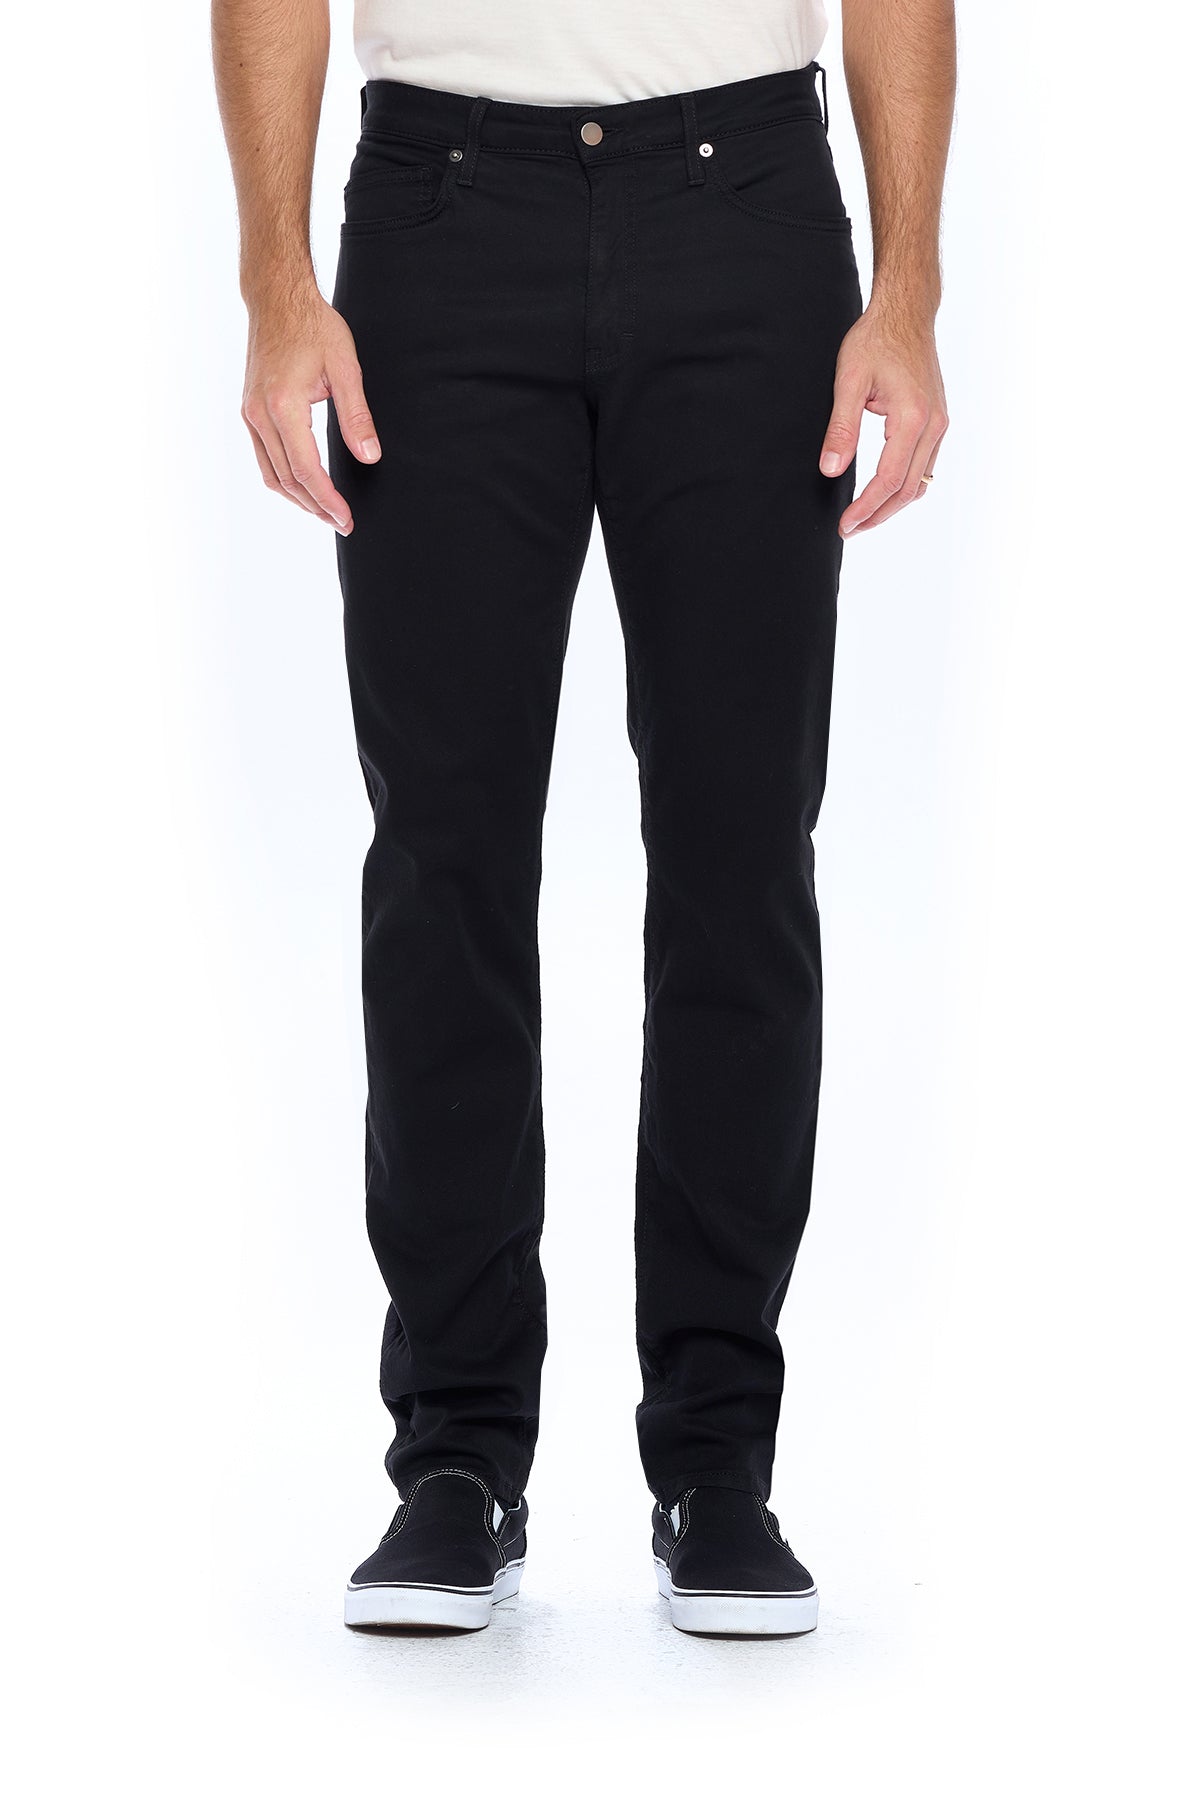 Mens Jet Black Travel Jeans made with Japanese Twill with pickpocket prevention technology